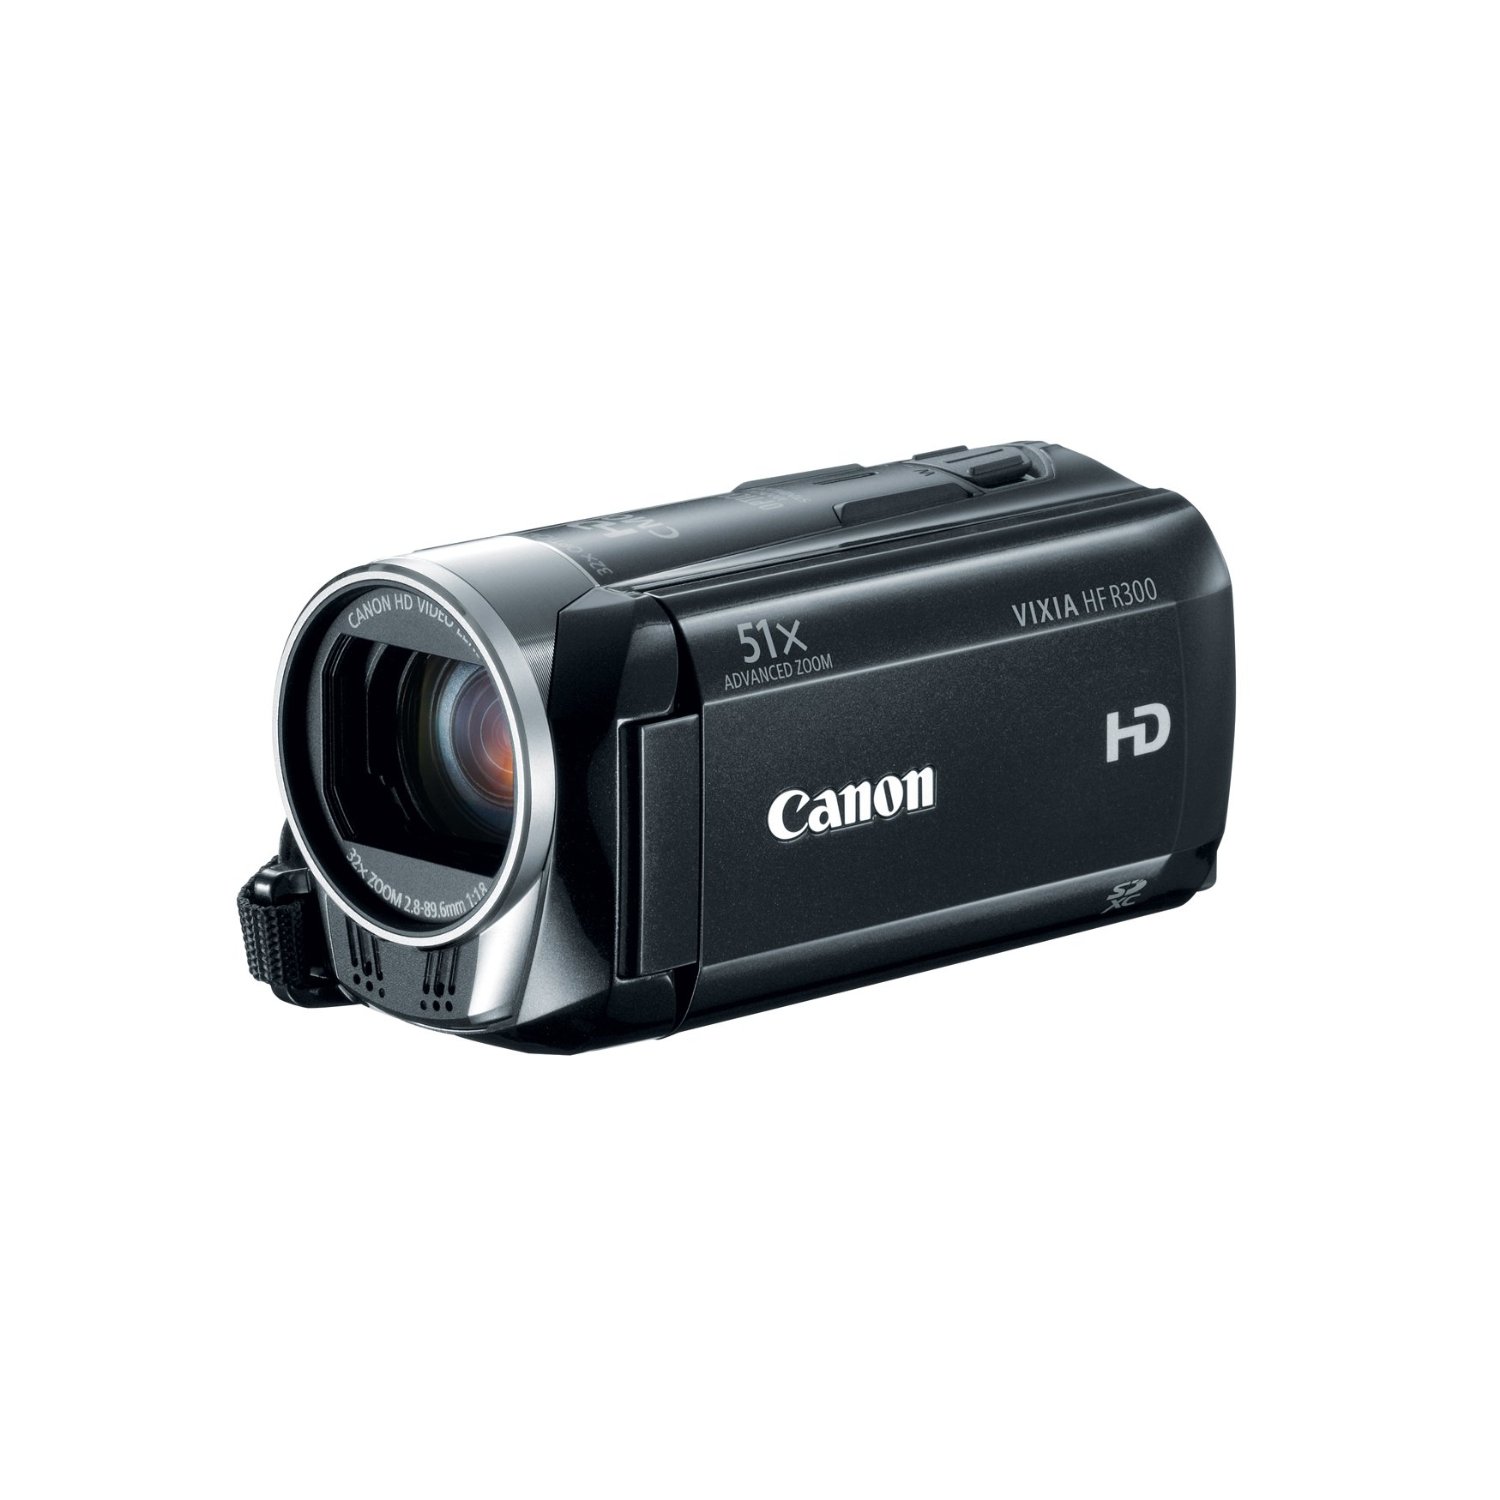 http://thetechjournal.com/wp-content/uploads/images/1202/1328098403-canon-vixia-hf-r300-full-hd-51x-image-stabilized-optical-zoom-camcorder-1.jpg